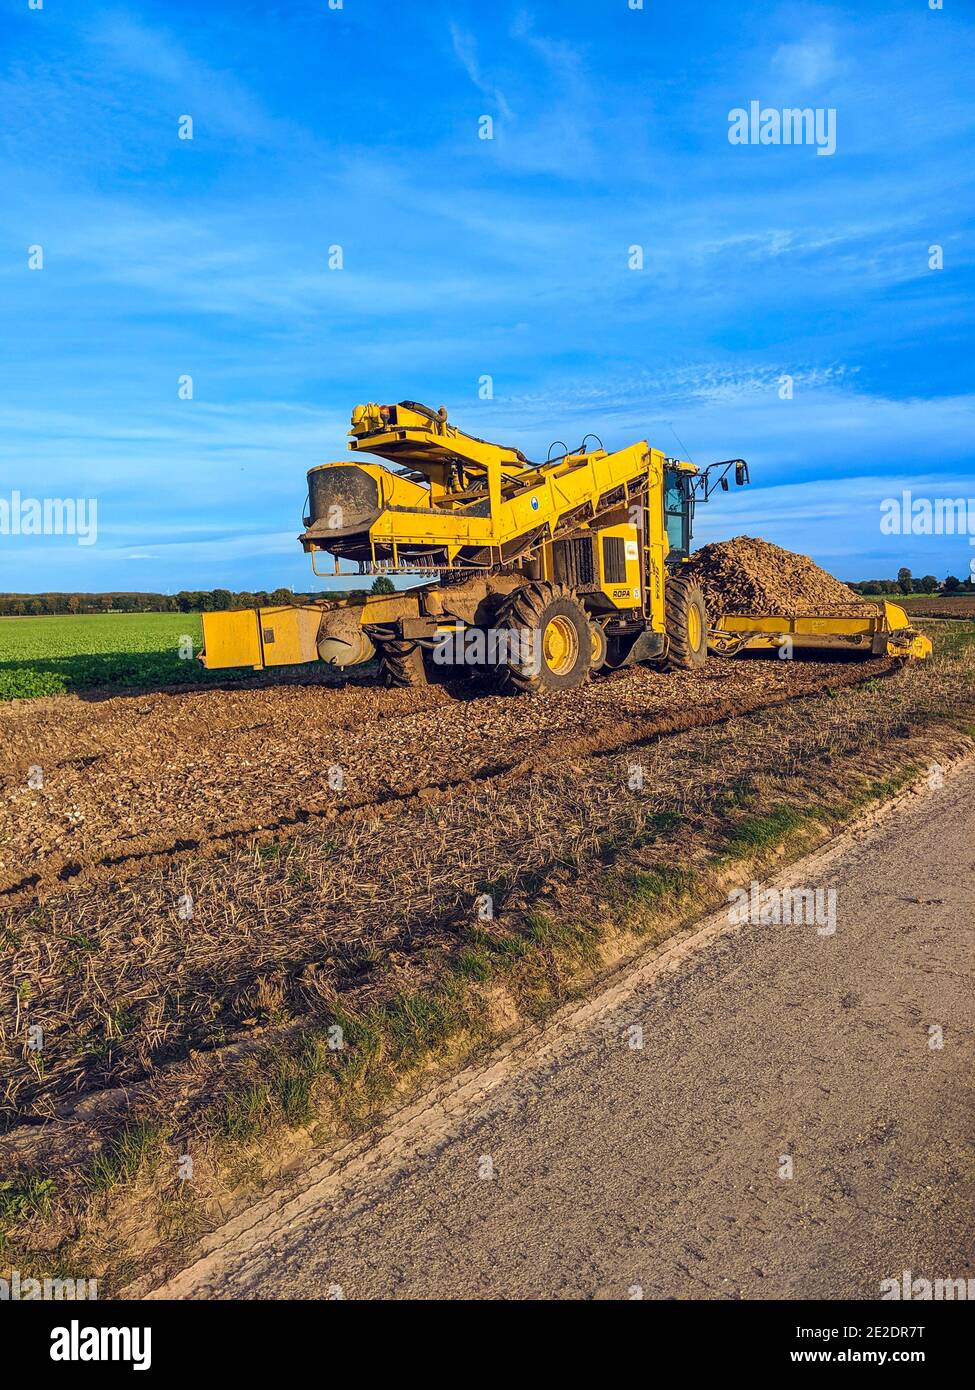 A farmer harvesting sugar beet using a specialised sugarbeet harvester in an agricultural field. Beet farming in Germany. Stock Photo